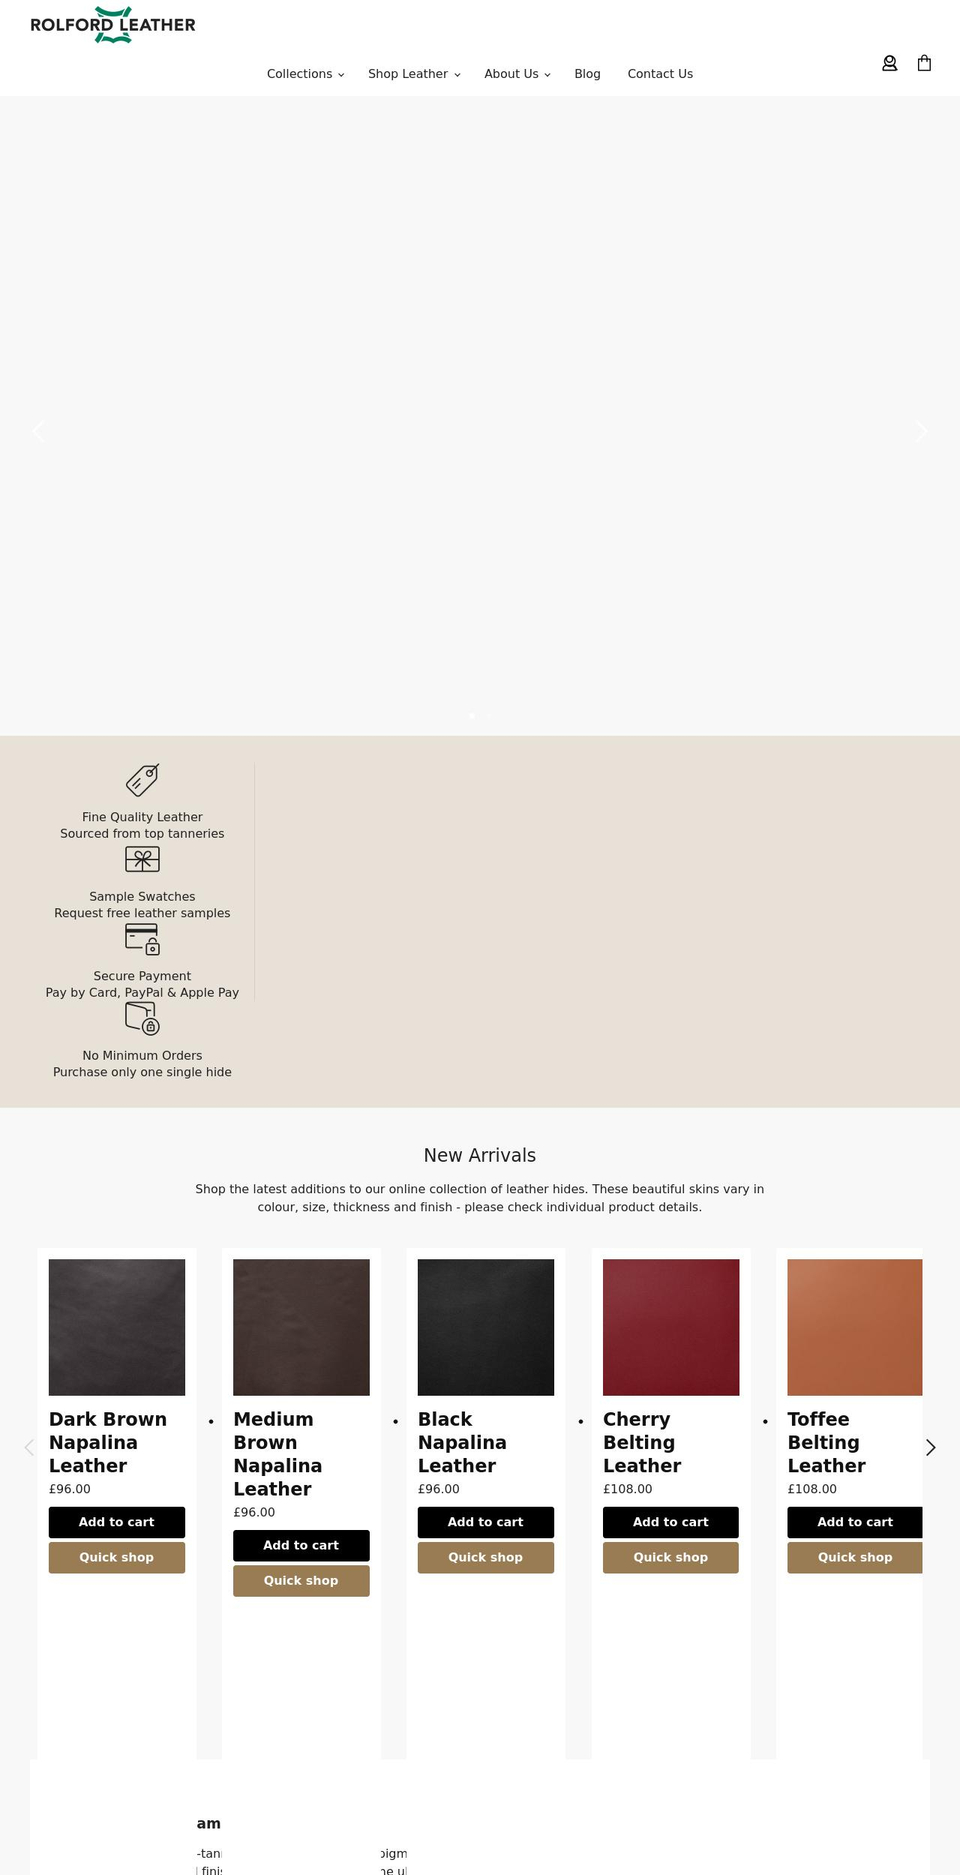 Leather Shopify theme site example rolfordleather.com